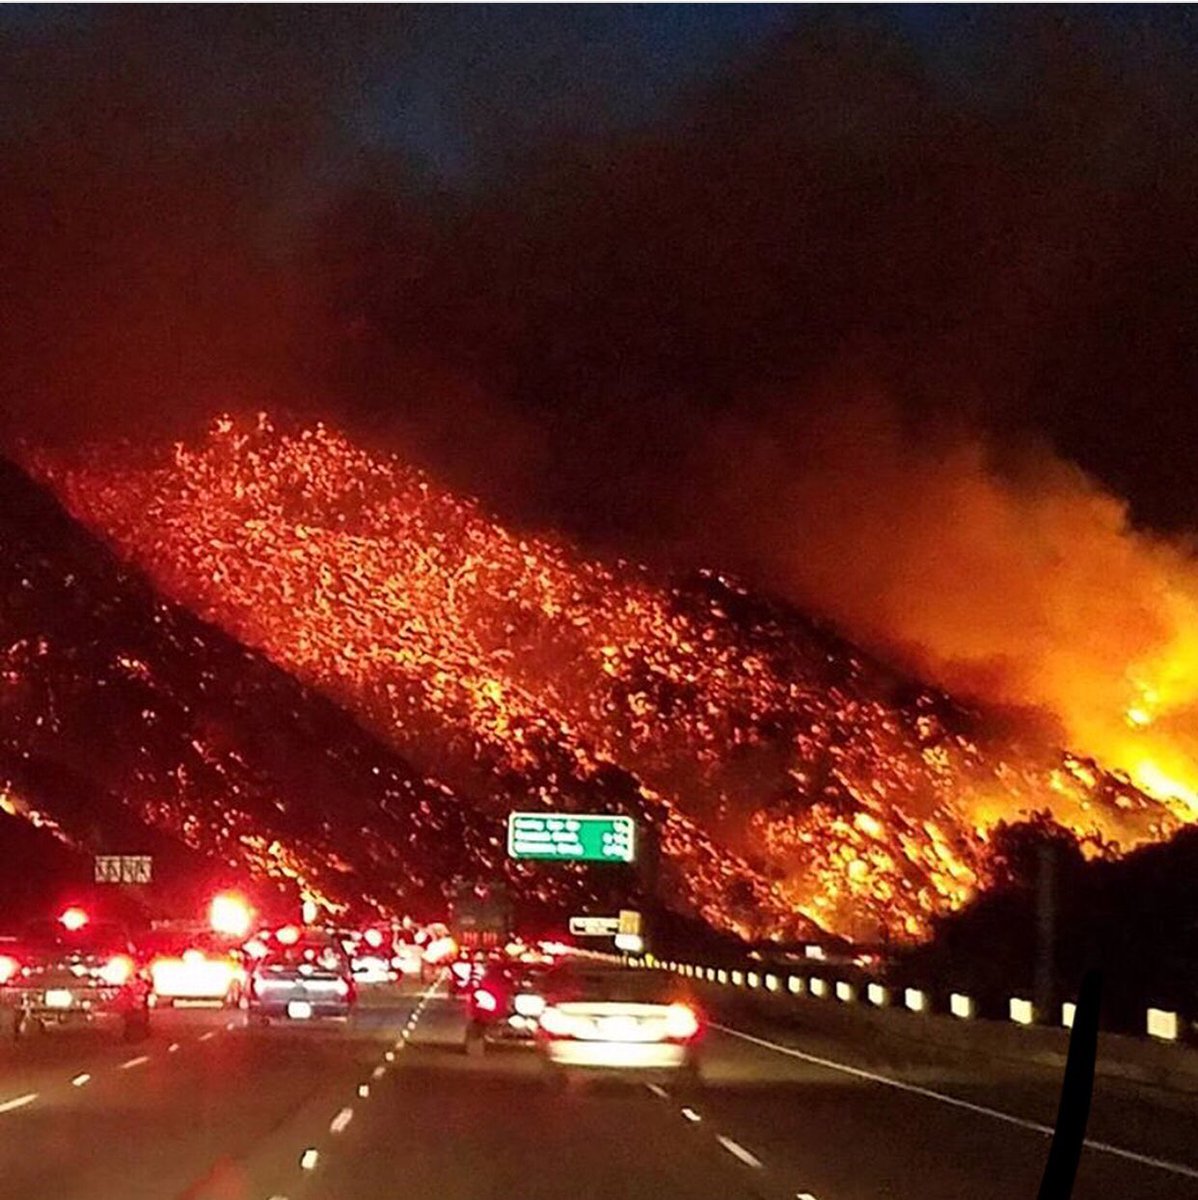 The image shows a number of cars on a freeway, slightly out of focus. It's dark, and the cars all have their lights on. In the background, the world is on fire. The hillside nearest the camera on the left of the image seems to be smouldering, more smoke and coal than fire. Beyond that, you can see a brighter orange, leading to yellow flames on the righthand side of the picture, illuminating the smoke that fills the sky. The cars are all driving straight towards the inferno. It's as if they're commuting into a fiery underworld. 